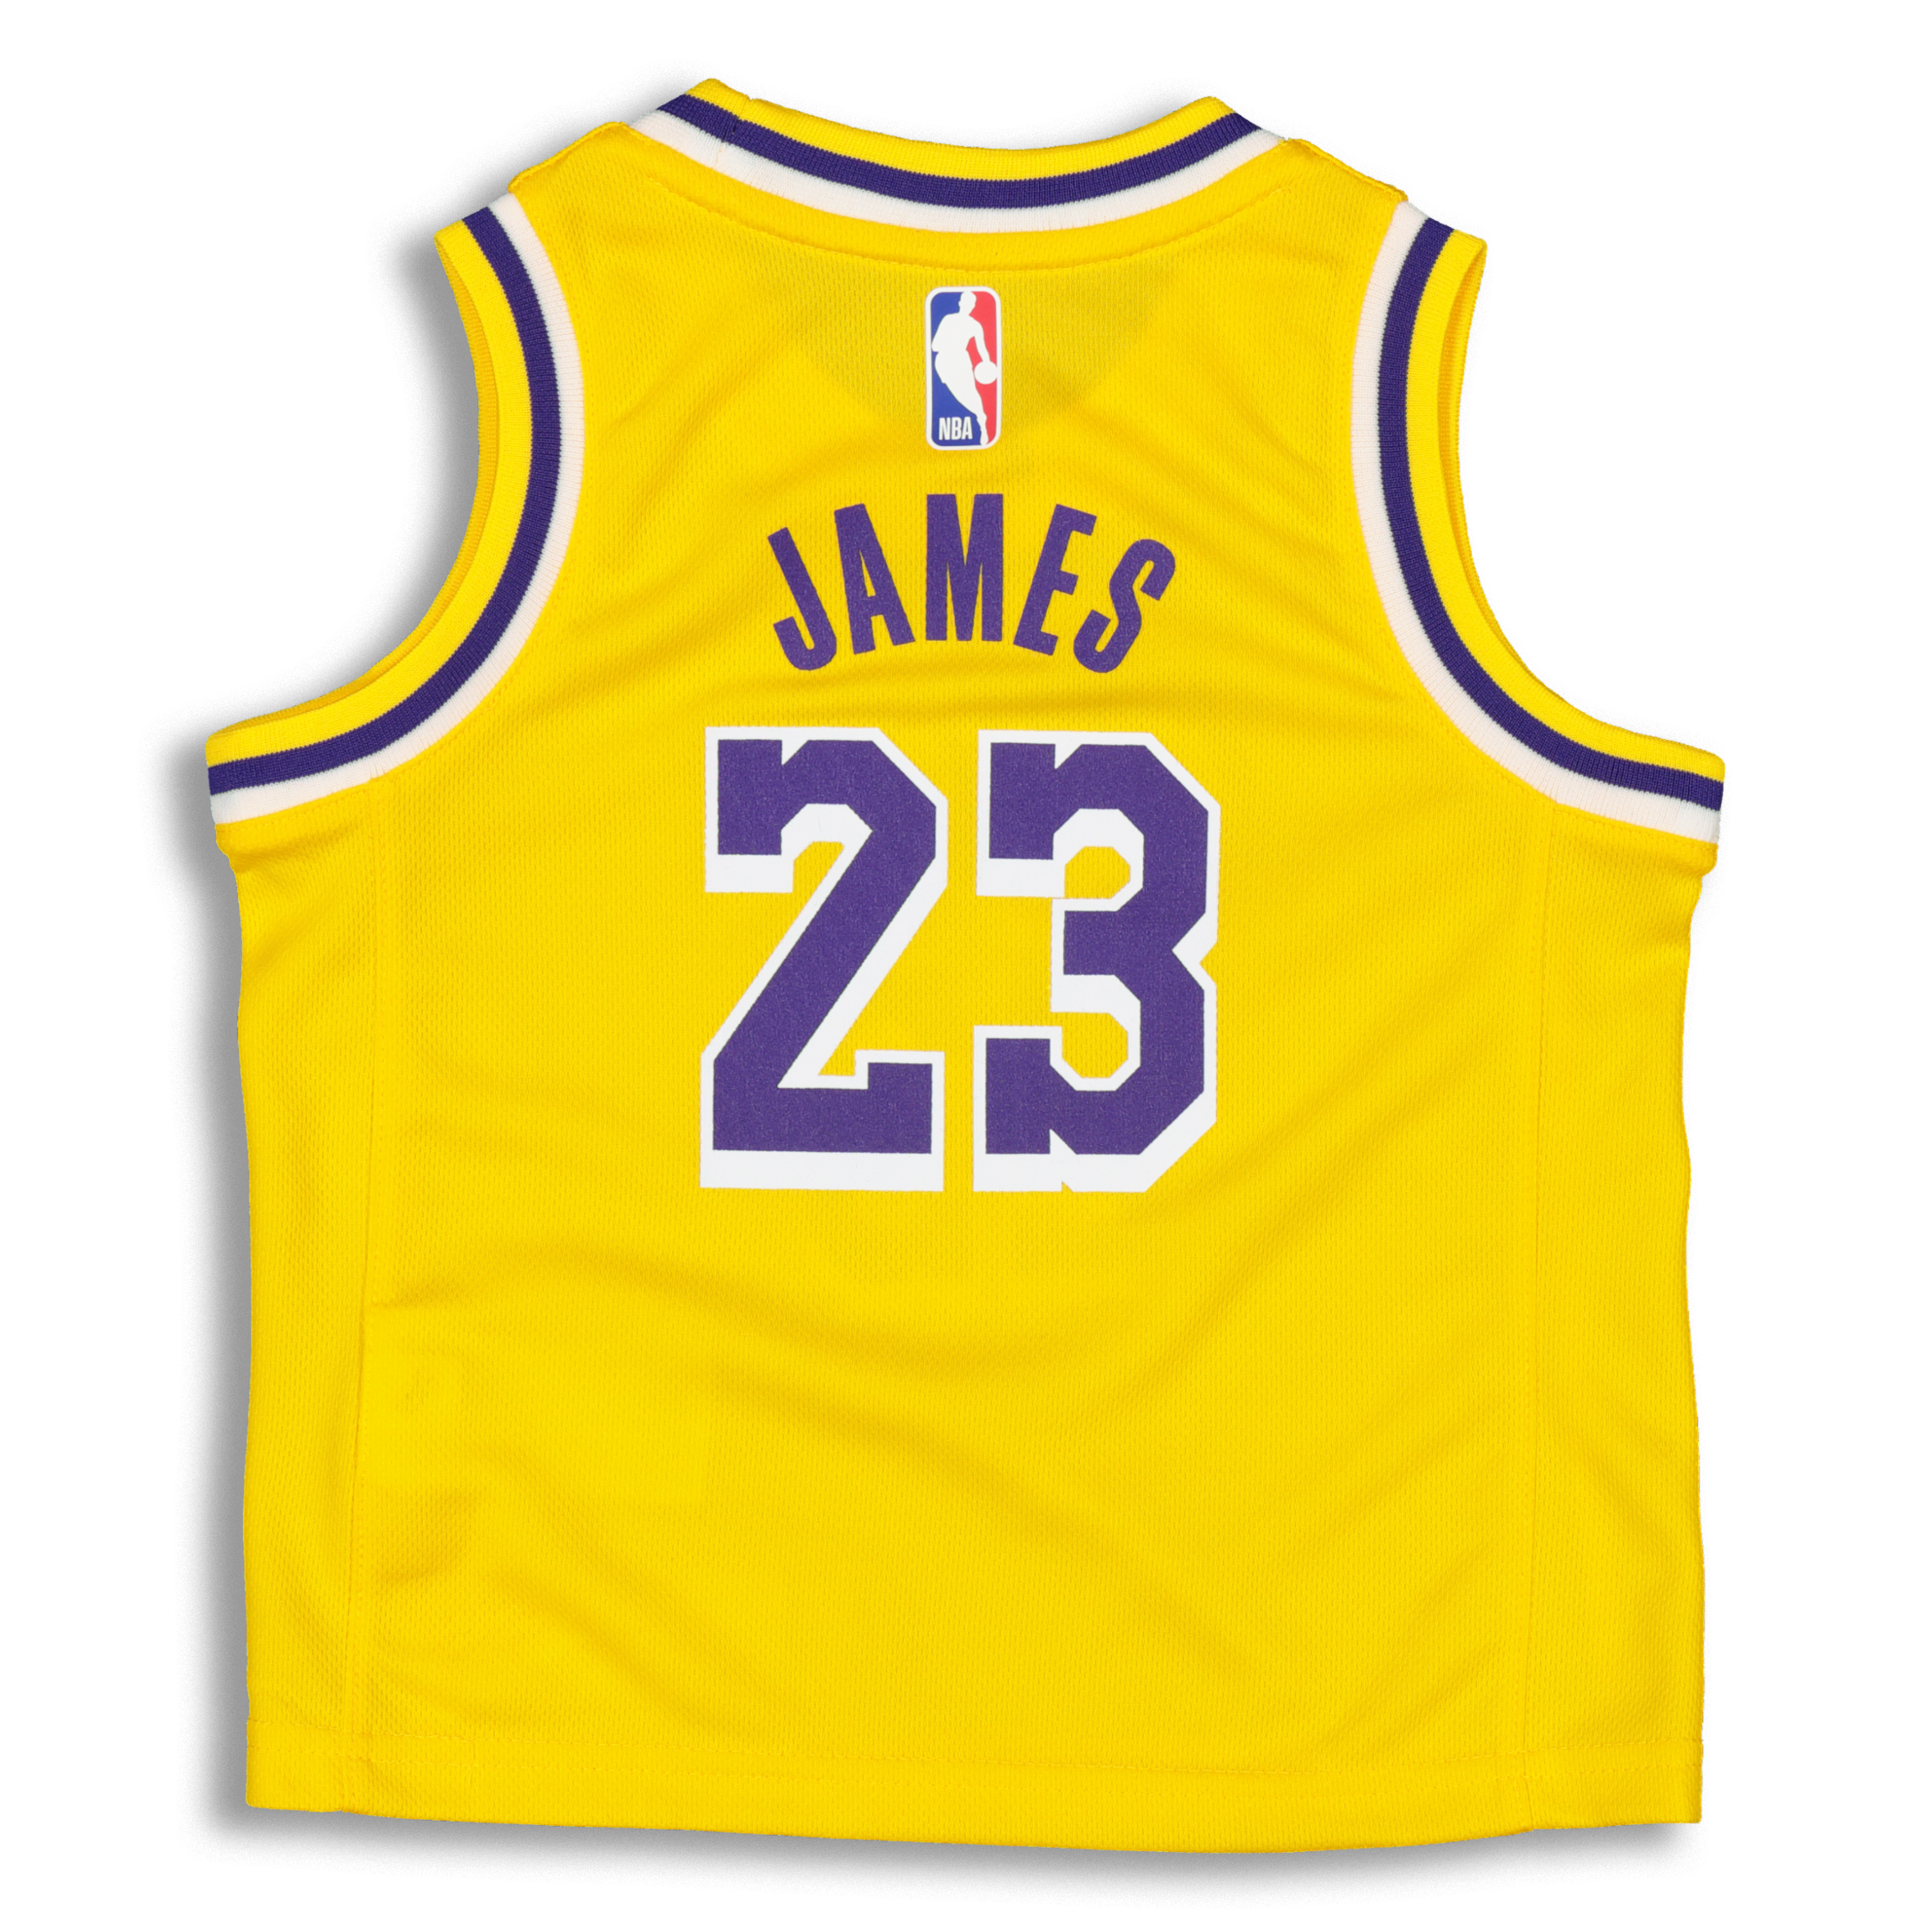 4t lakers jersey